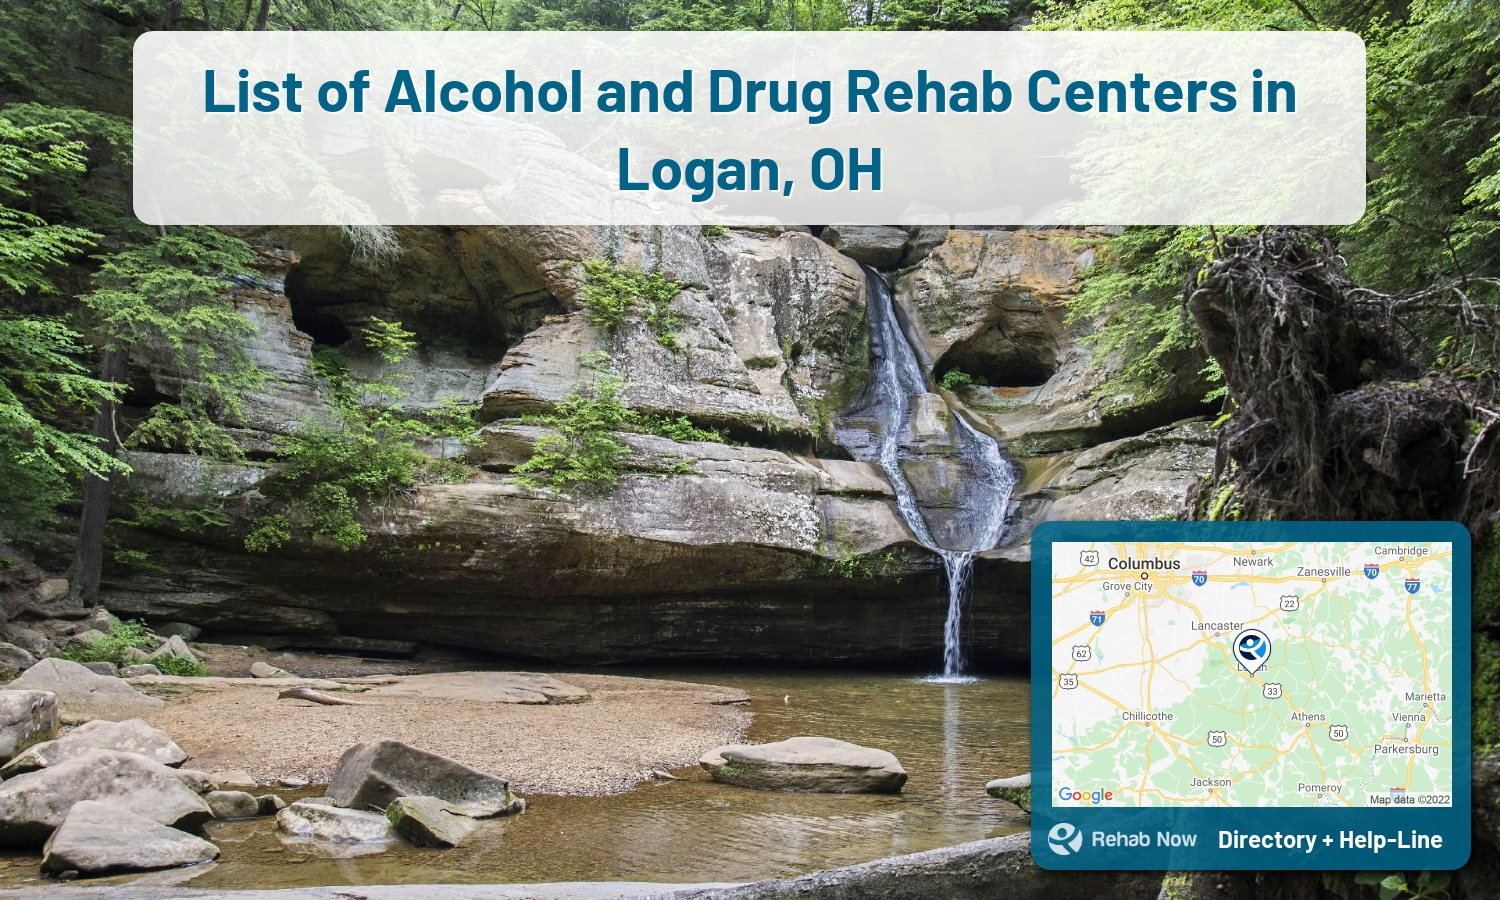 Easily find the top Rehab Centers in Logan, OH. We researched hard to pick the best alcohol and drug rehab centers in Ohio.